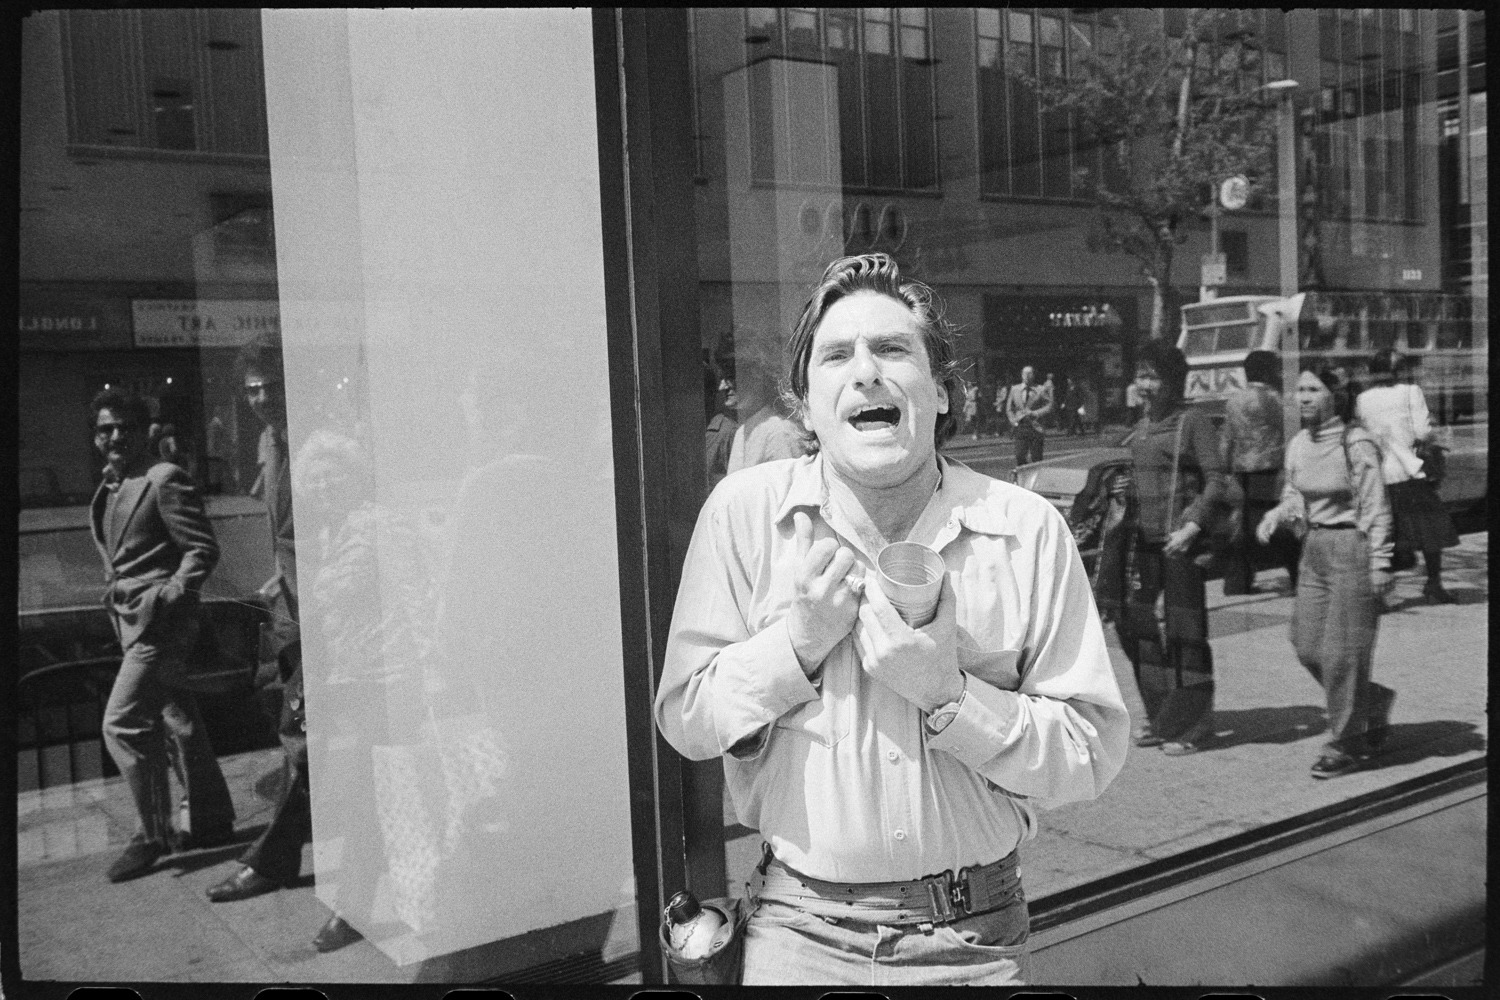 New York Street Photos In The &#8217;70s: The Original Opera Guy?, Mason Resnick Photography